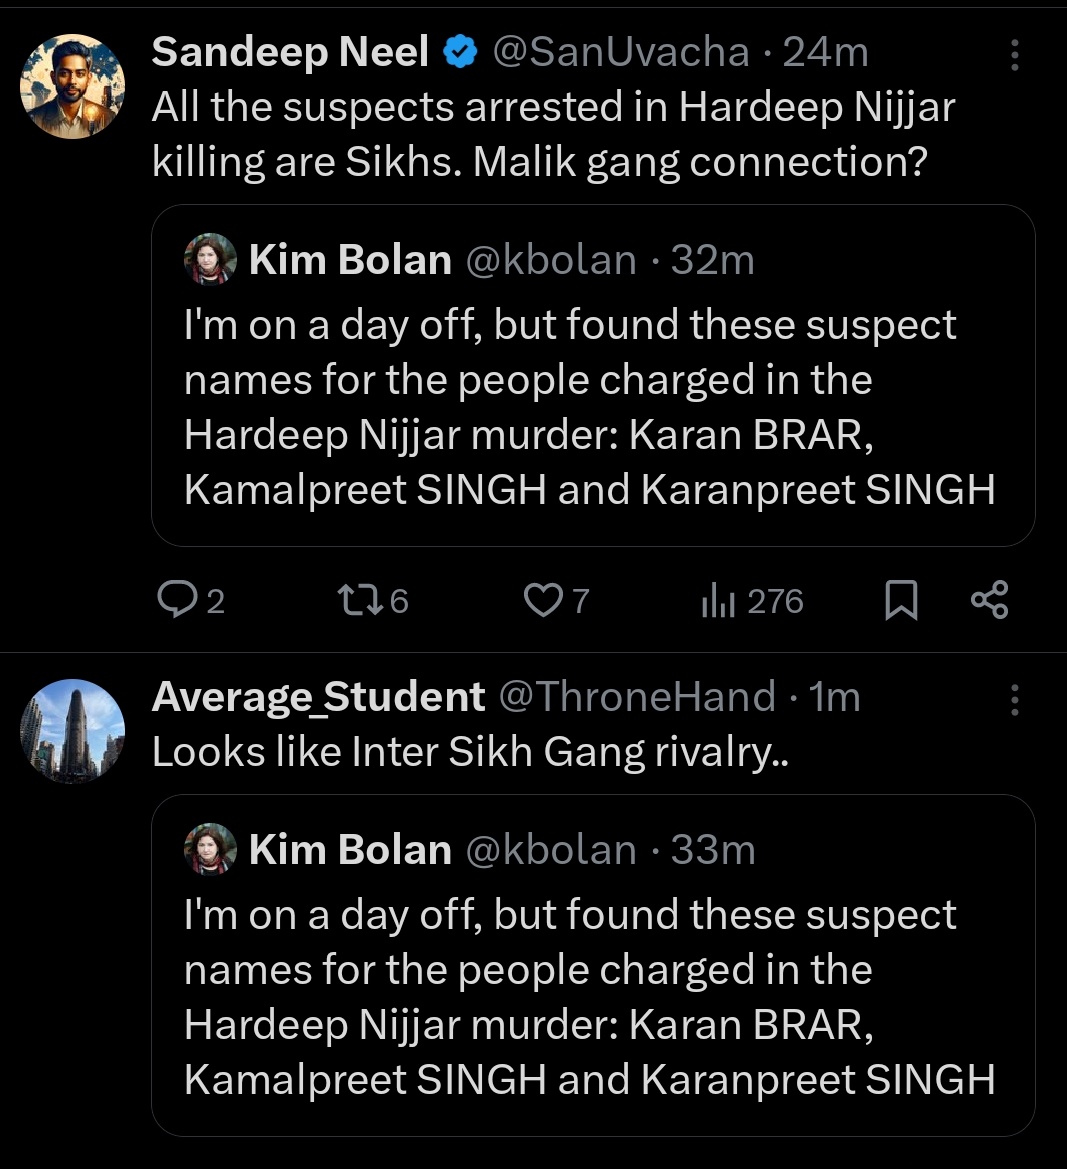 Today's updates on Nijjar's assassination again affirm India's involvement. So what does @kbolan do? Subtly fuel Indian nationalist 'Sikh-on-Sikh' claims.

Newsflash; India used 'Sikh' henchmen to carry out the #SikhGenocide too. Kim needs to be investigated for Indian influence.